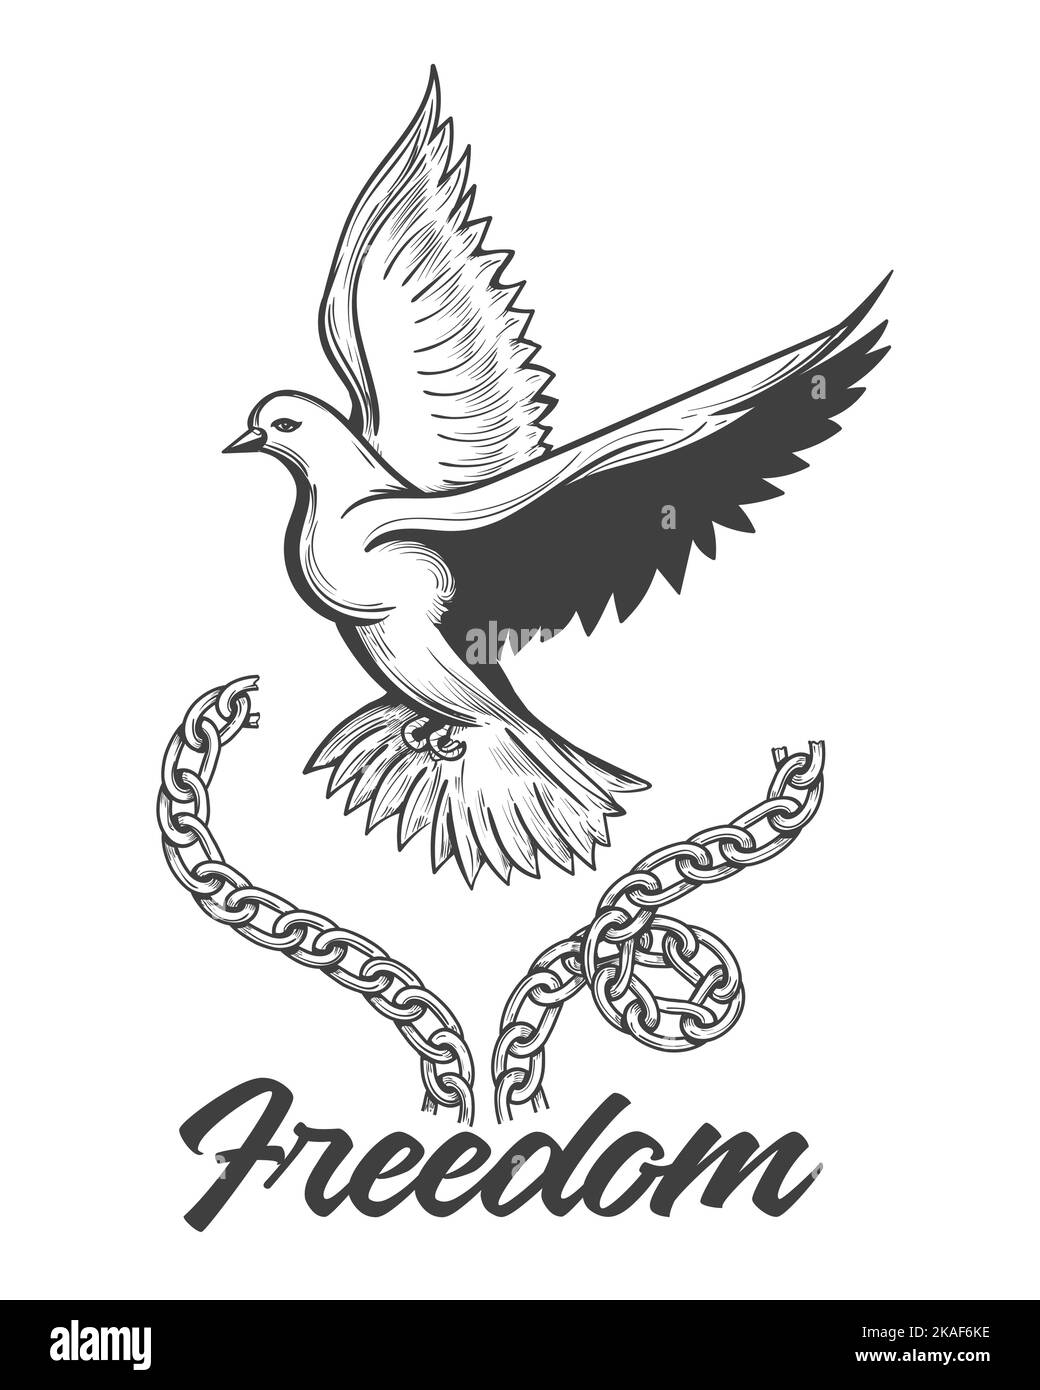 Tattoo of Flying Dove with Broken Chains Tattoo and wording Freedom. Vector ilustration isolated on white background. Stock Vector